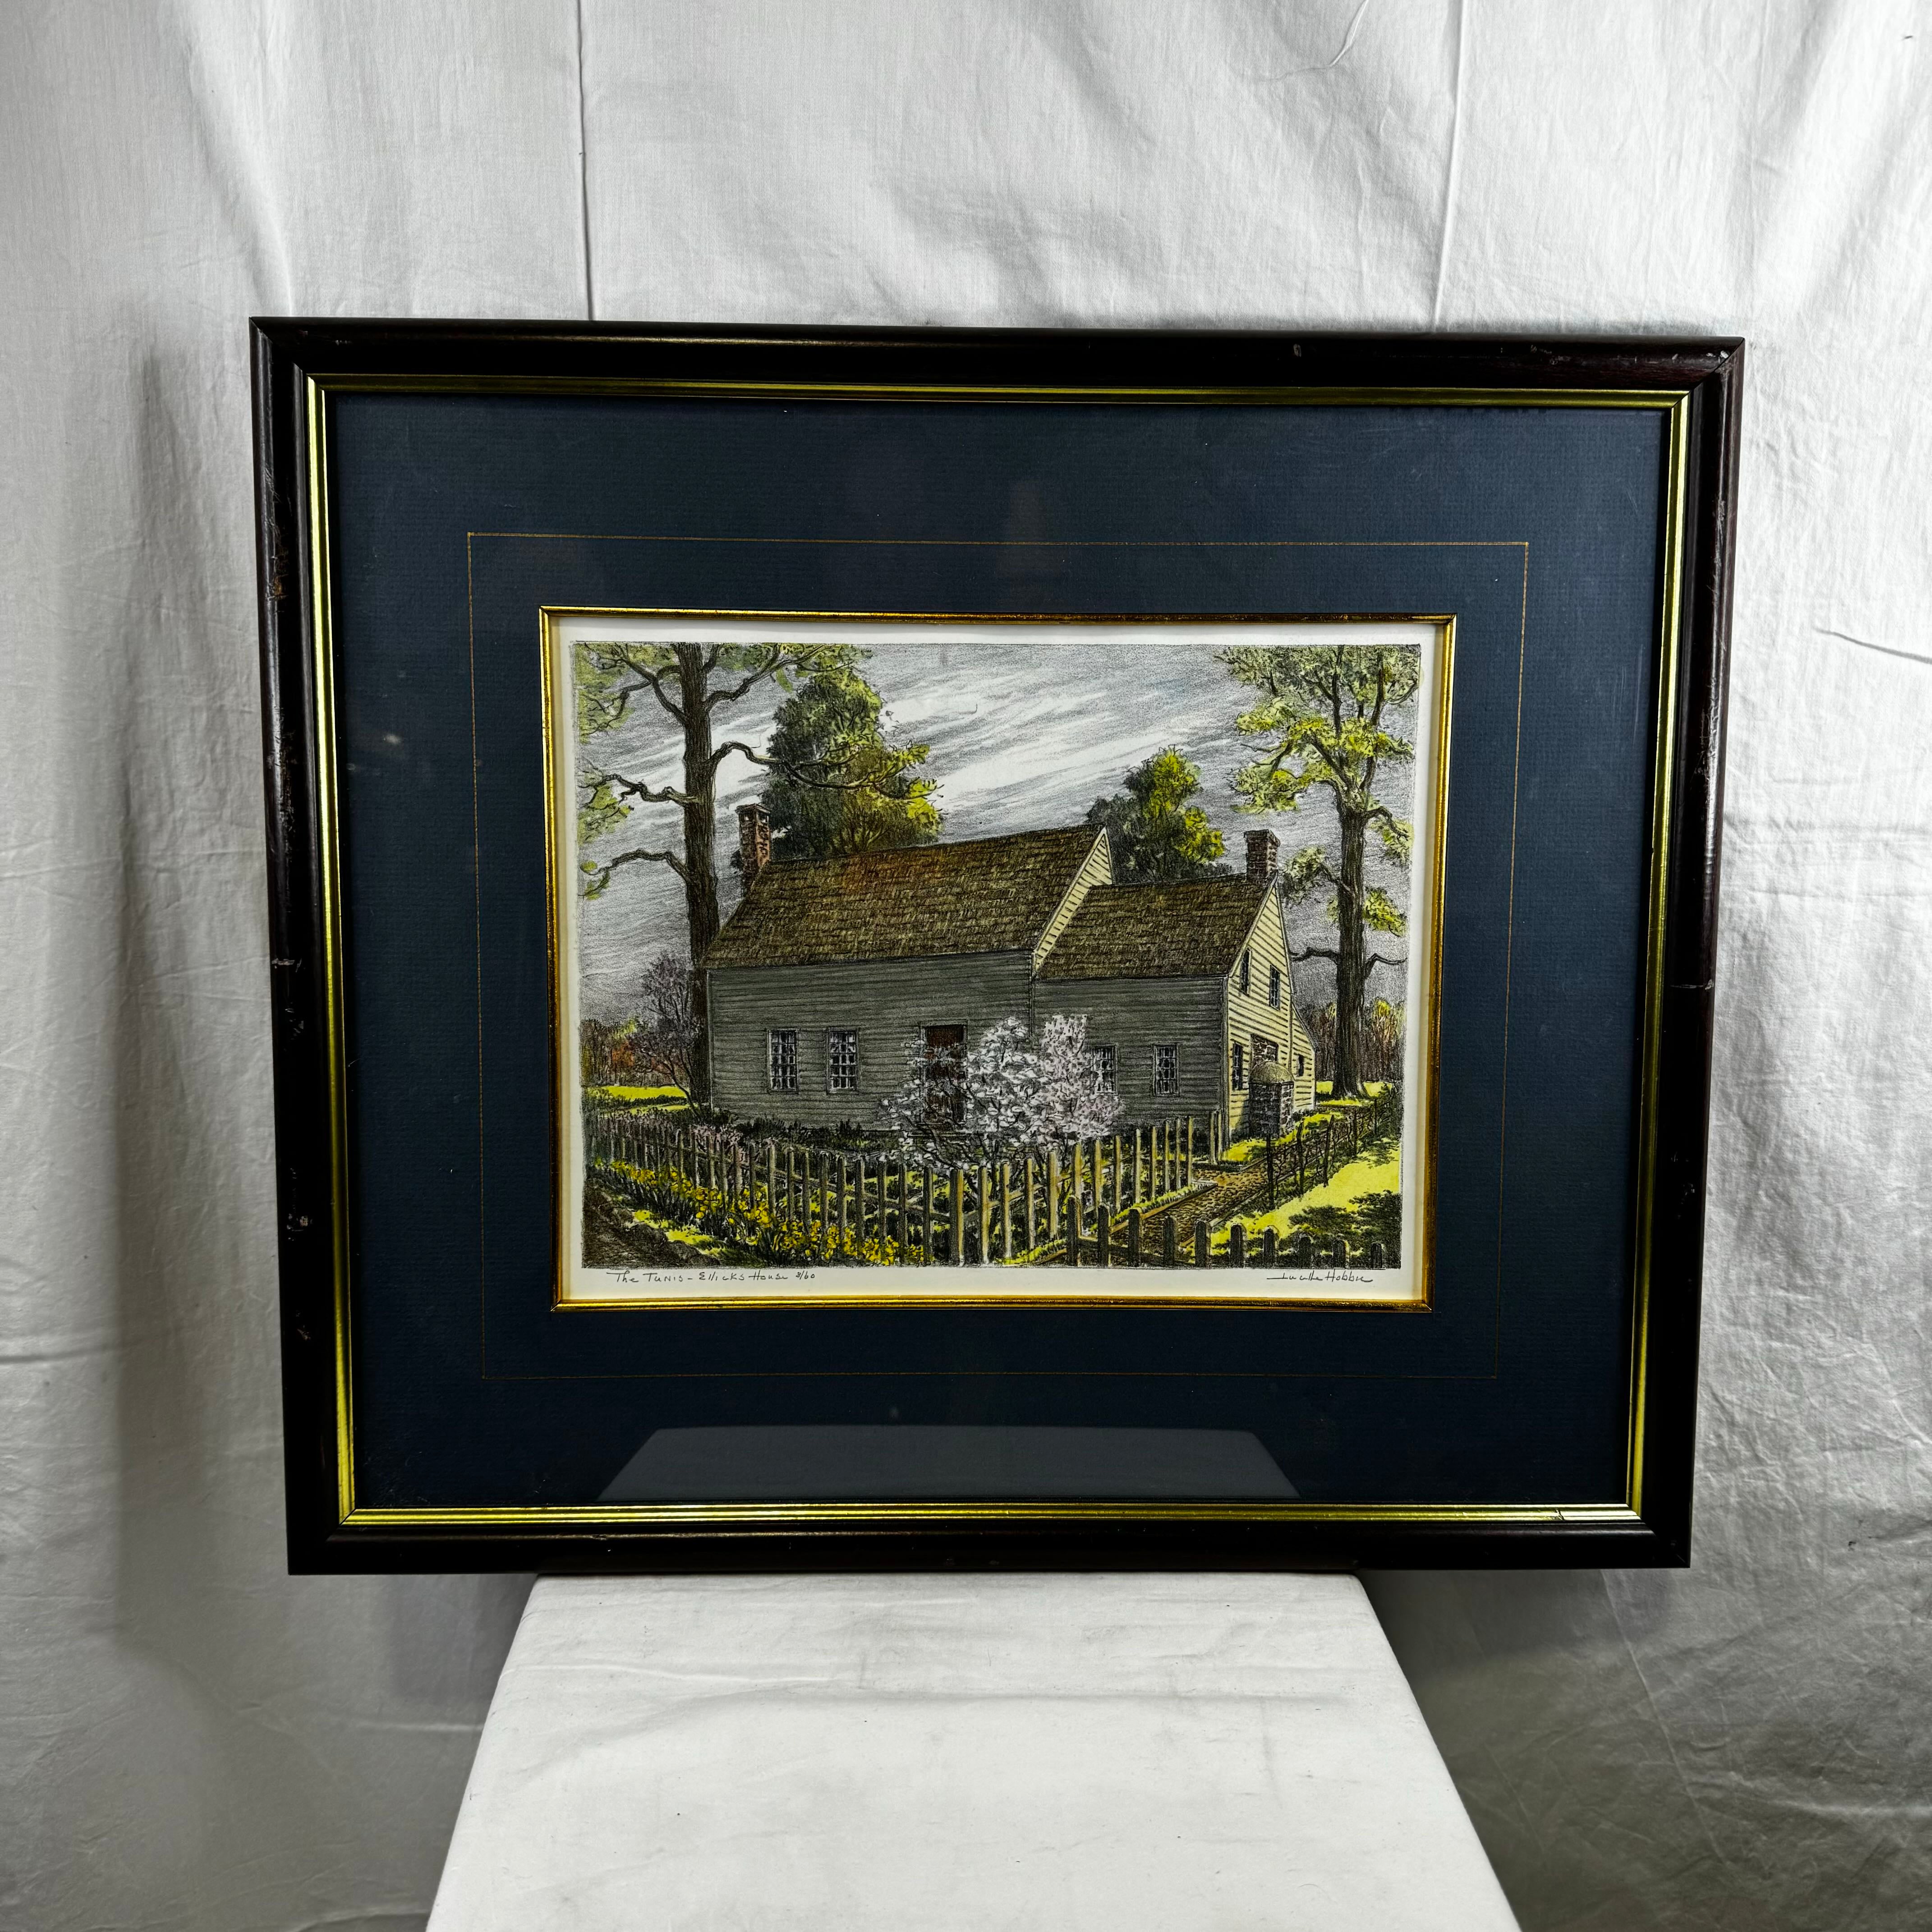 The Tunis Ellick House By Lucille Hobbie Print Matted with Gold Trim and Frame Wall Decor